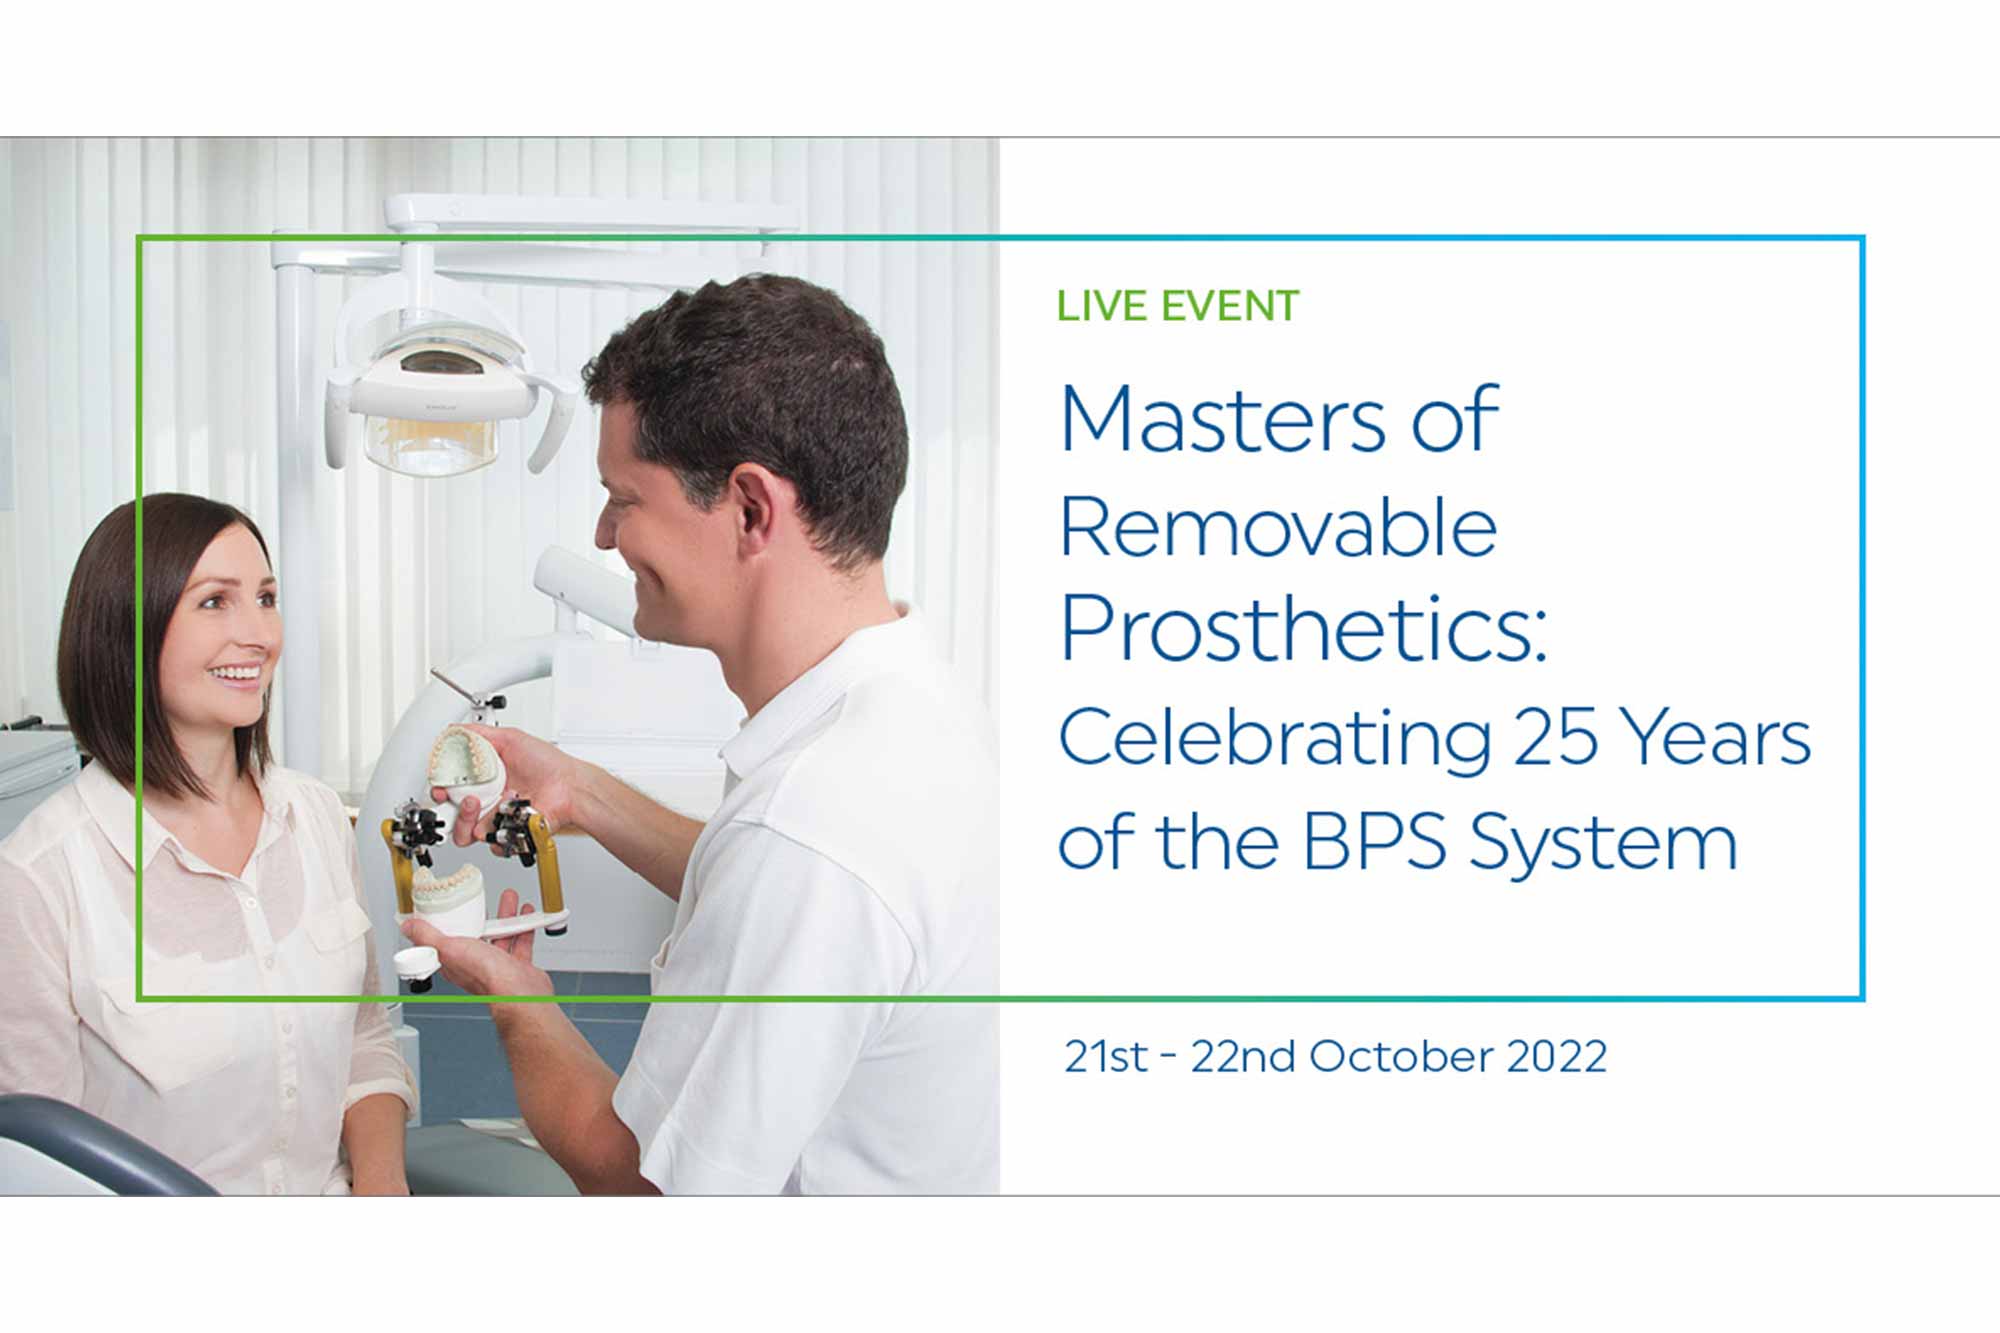 Masters of removable prosthetics – 25 years of BPS